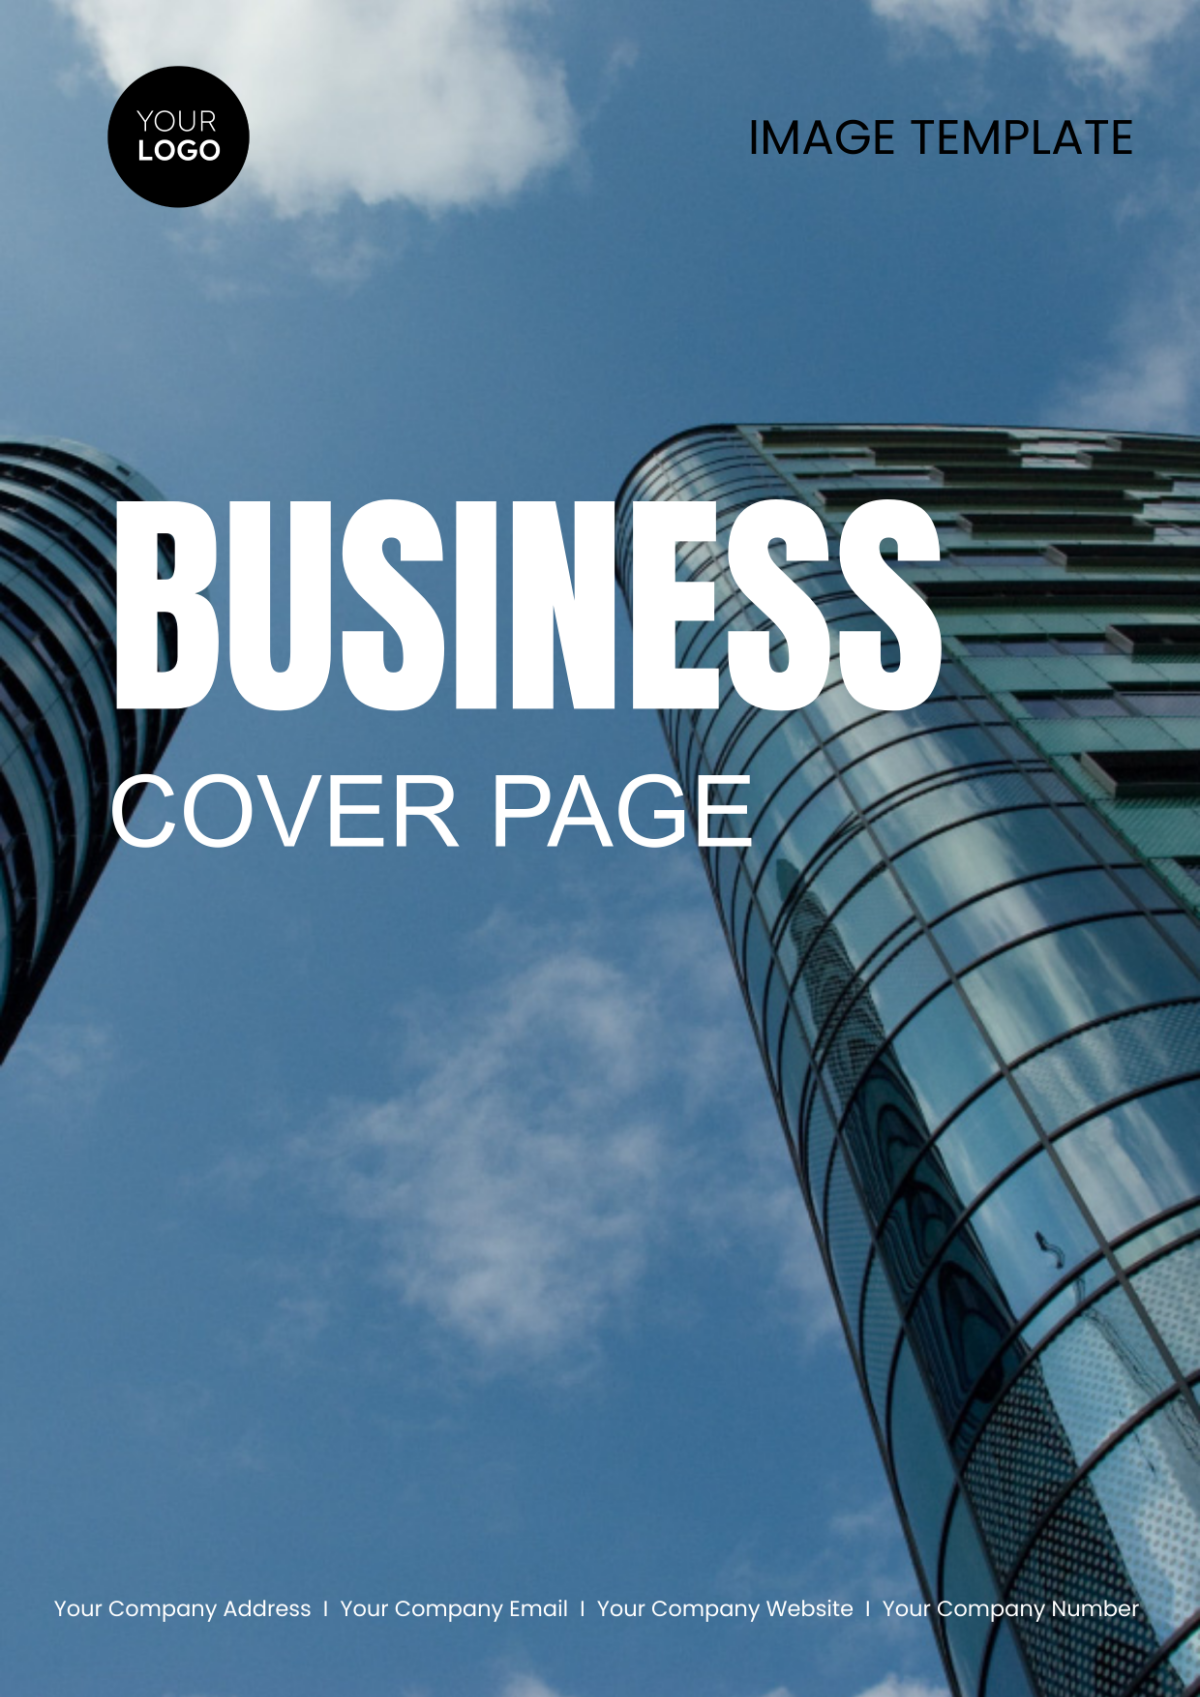 Business Cover Page Image